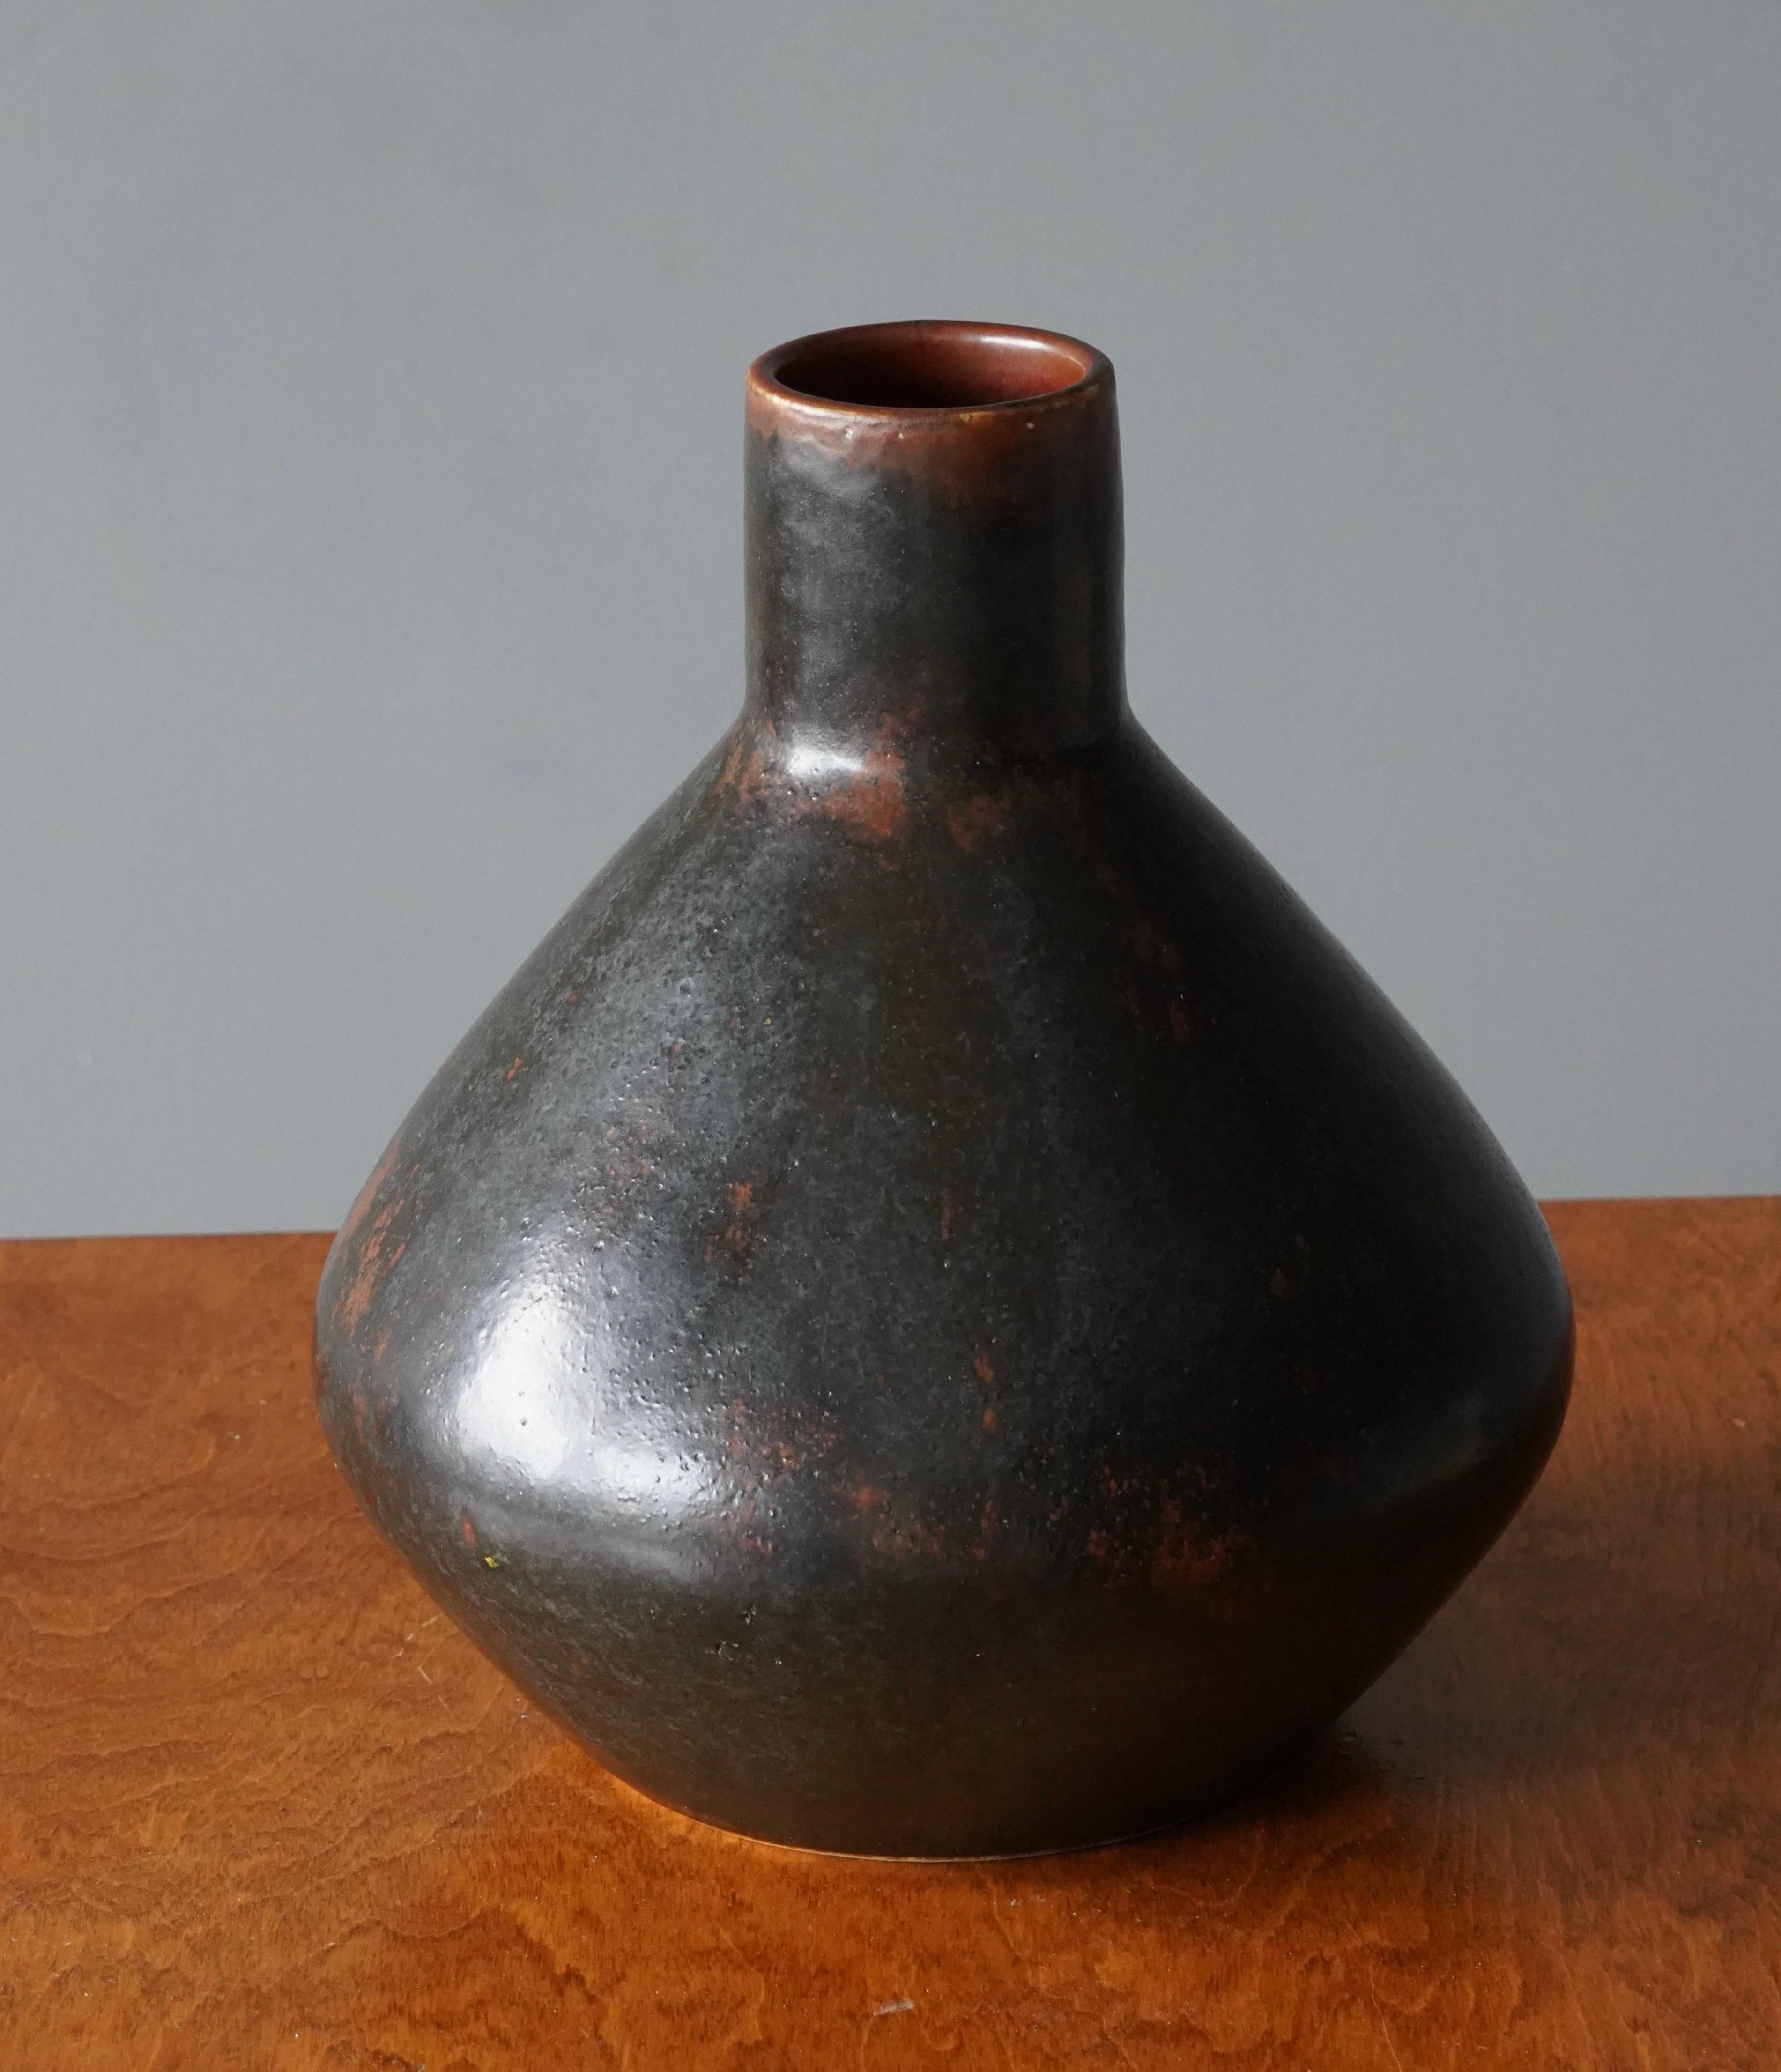 A unique studio vase by Carl-Harry Stålhane.

Part of a small scale production of unique works developed by the art department at the Swedish ceramic producer Rörstrand. The hand of the artist was highly involved in the execution of the unique